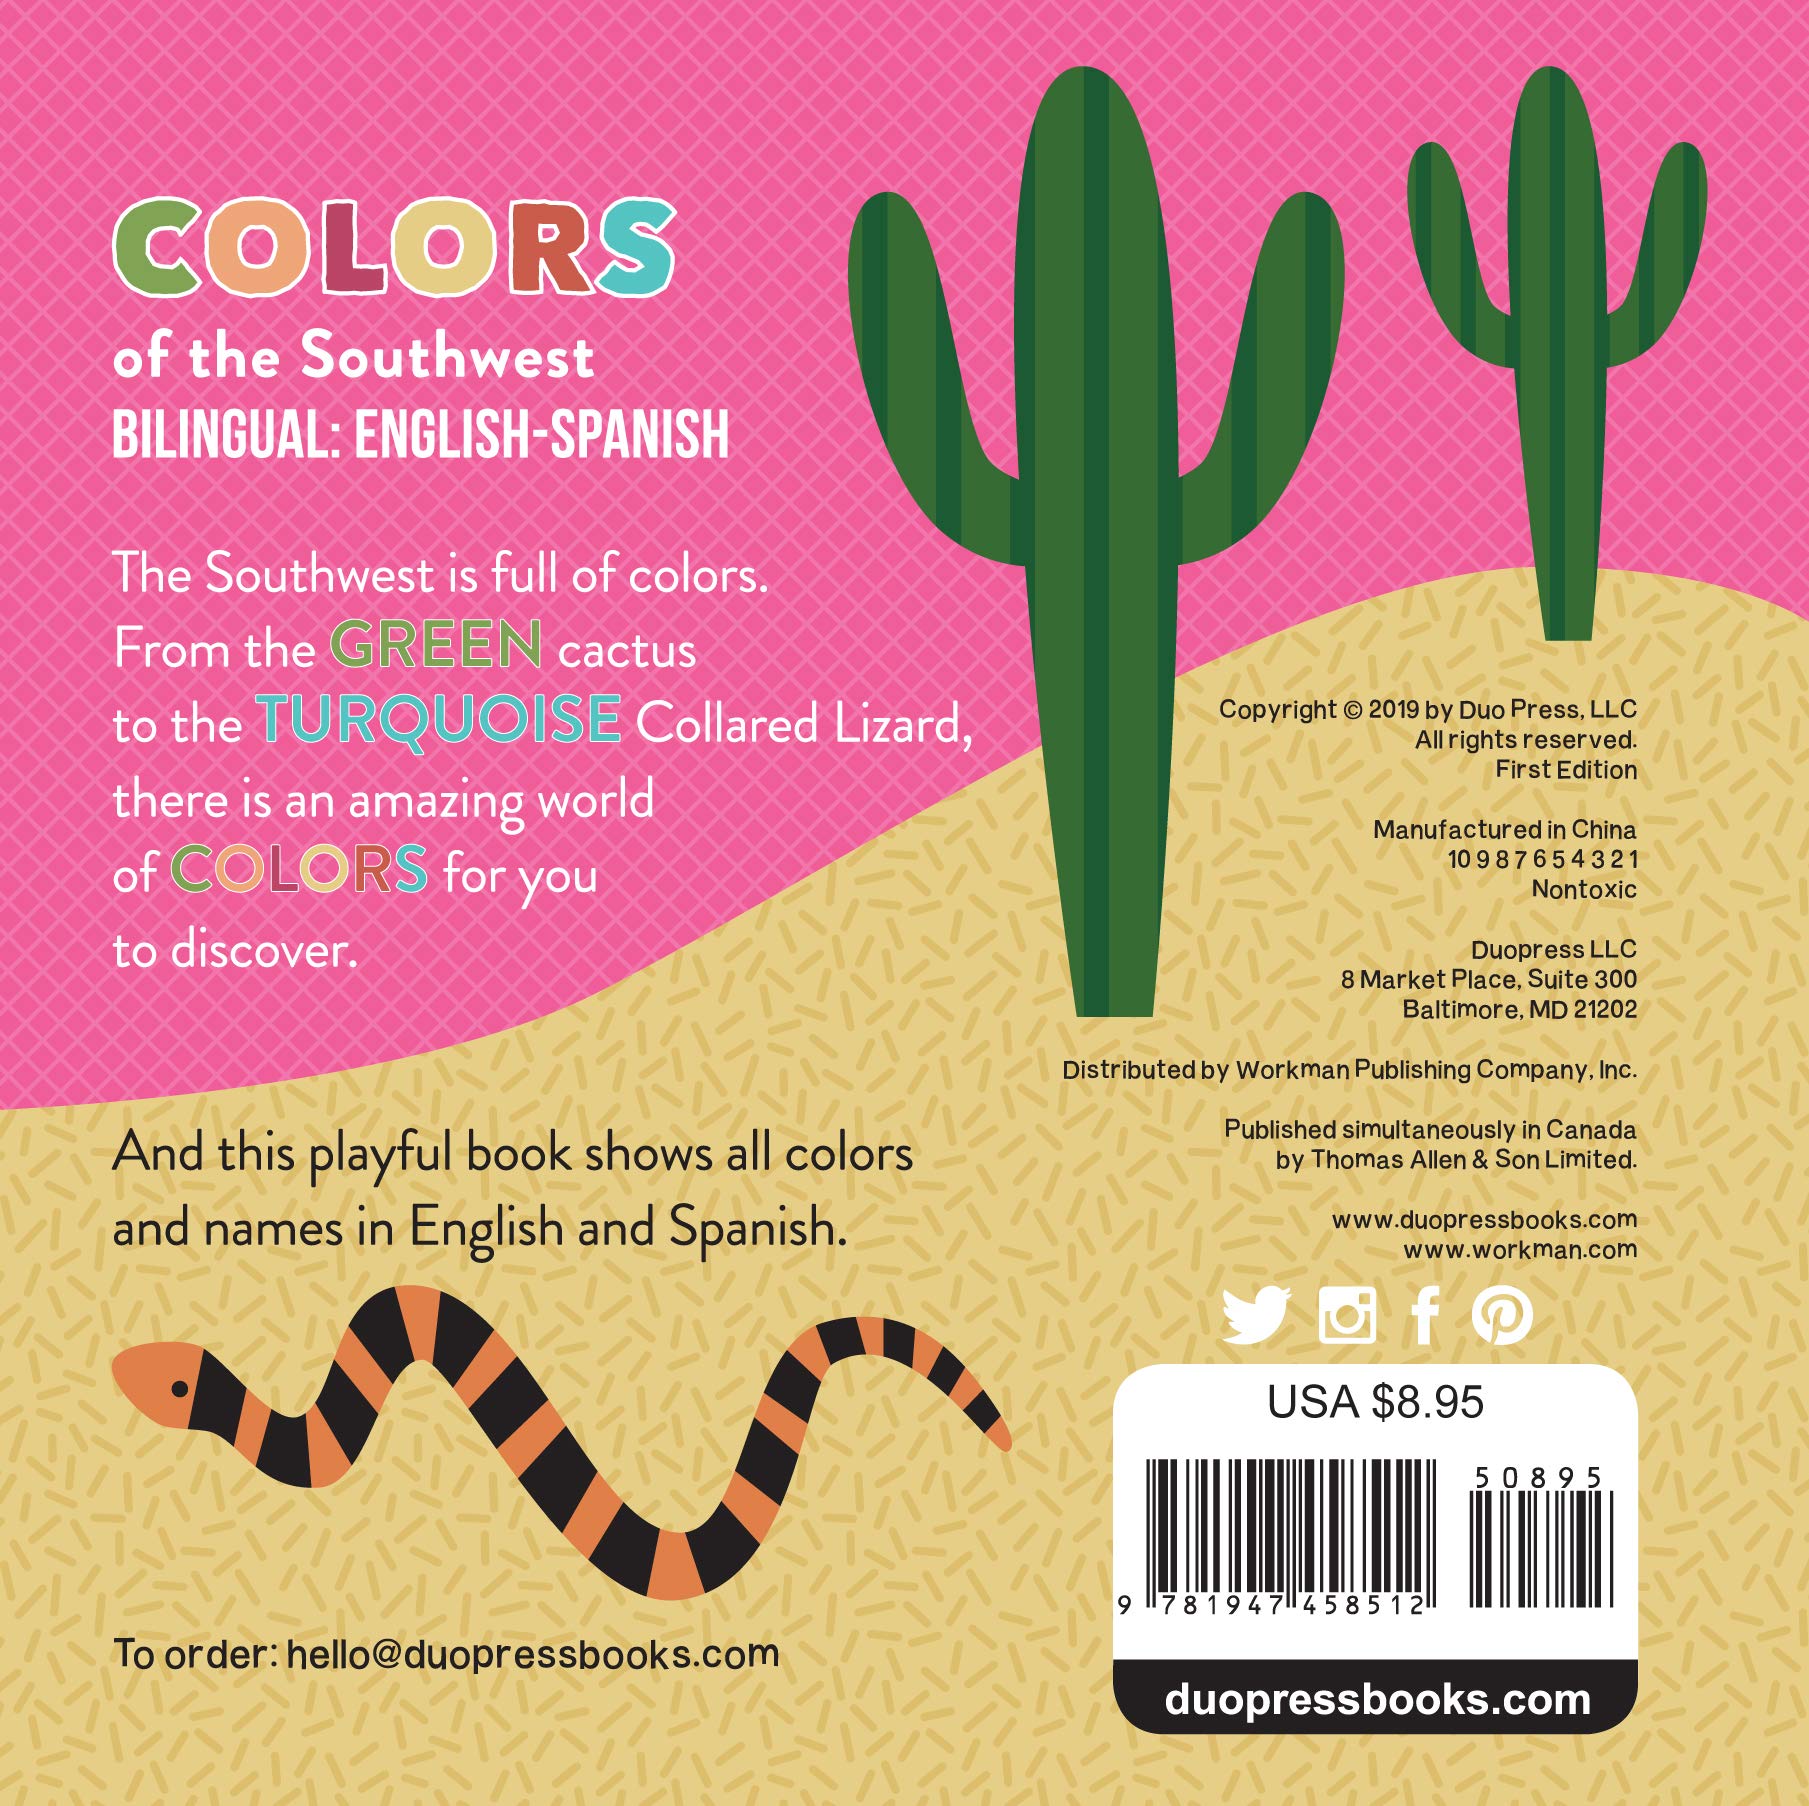 Colors of the Southwest